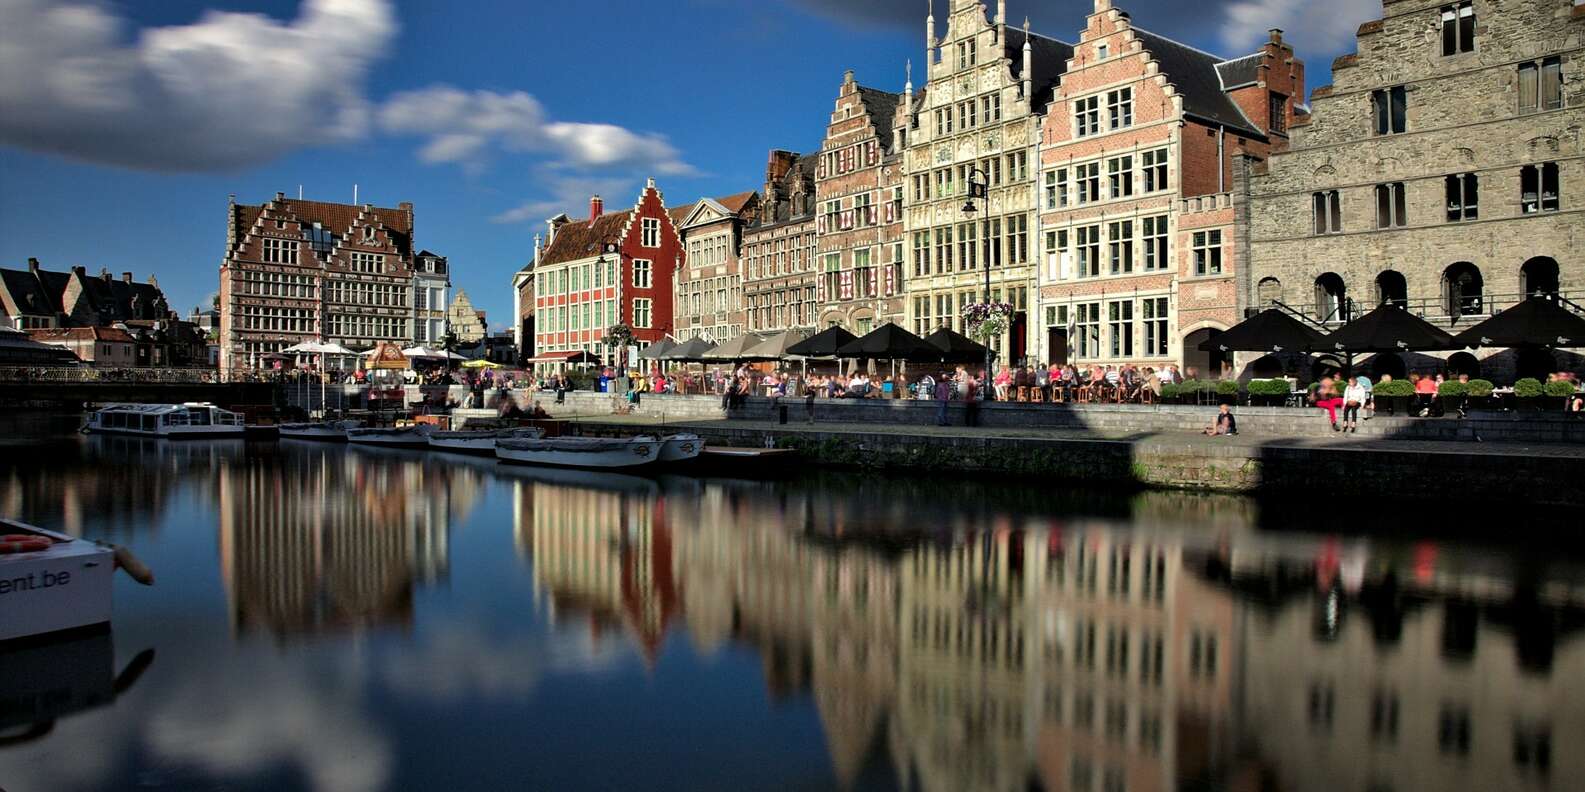 best things to do in Ghent